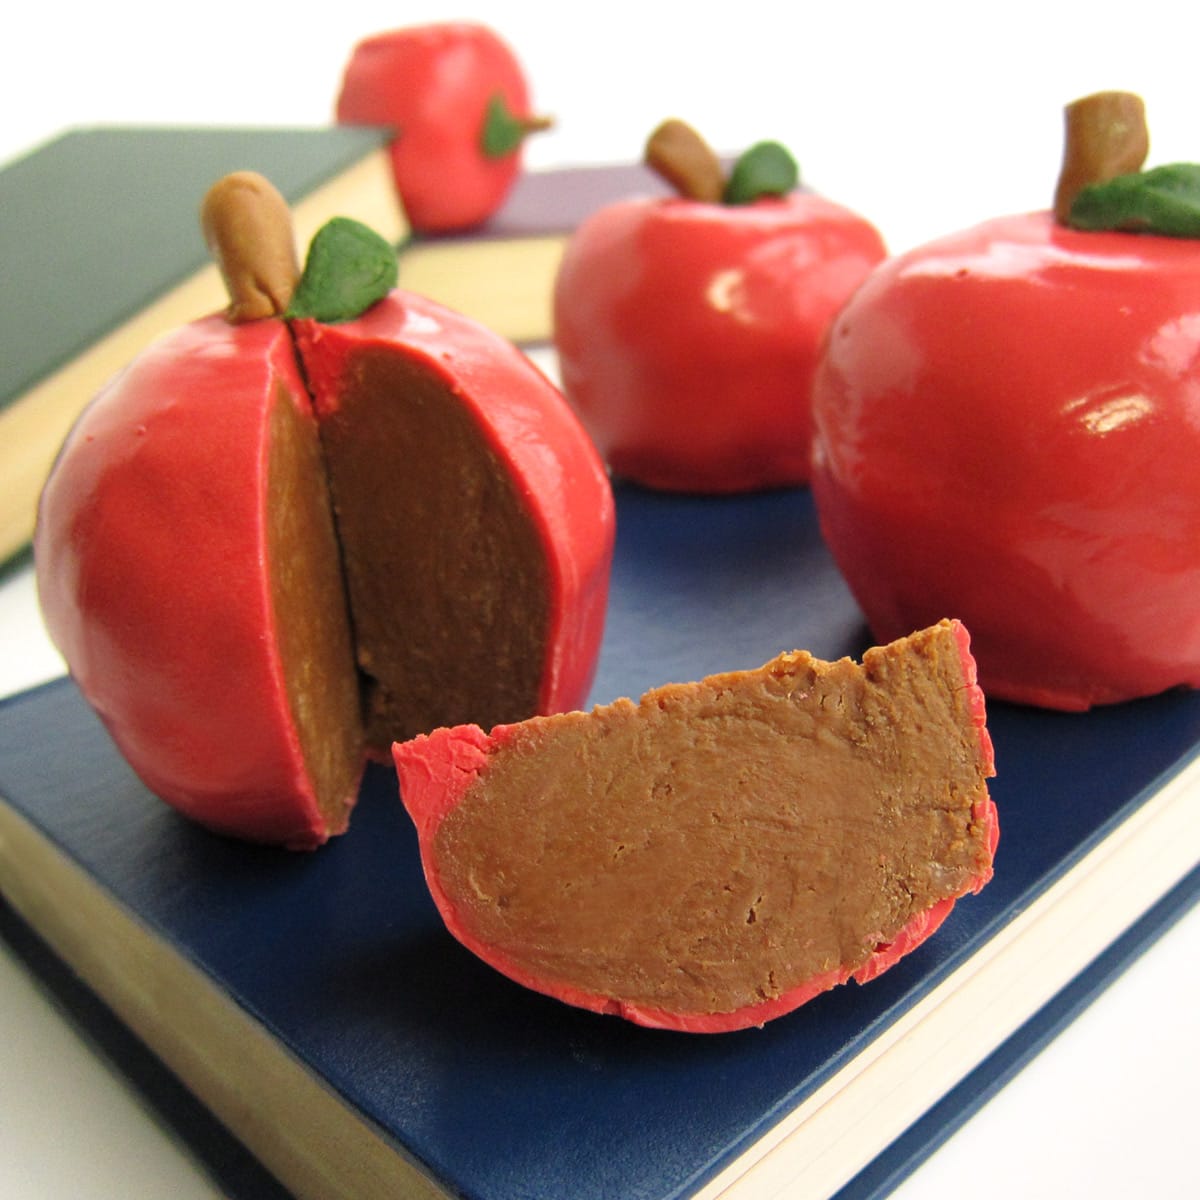 inside out caramel apples made with chocolate caramel fudge dipped in red candy melts.